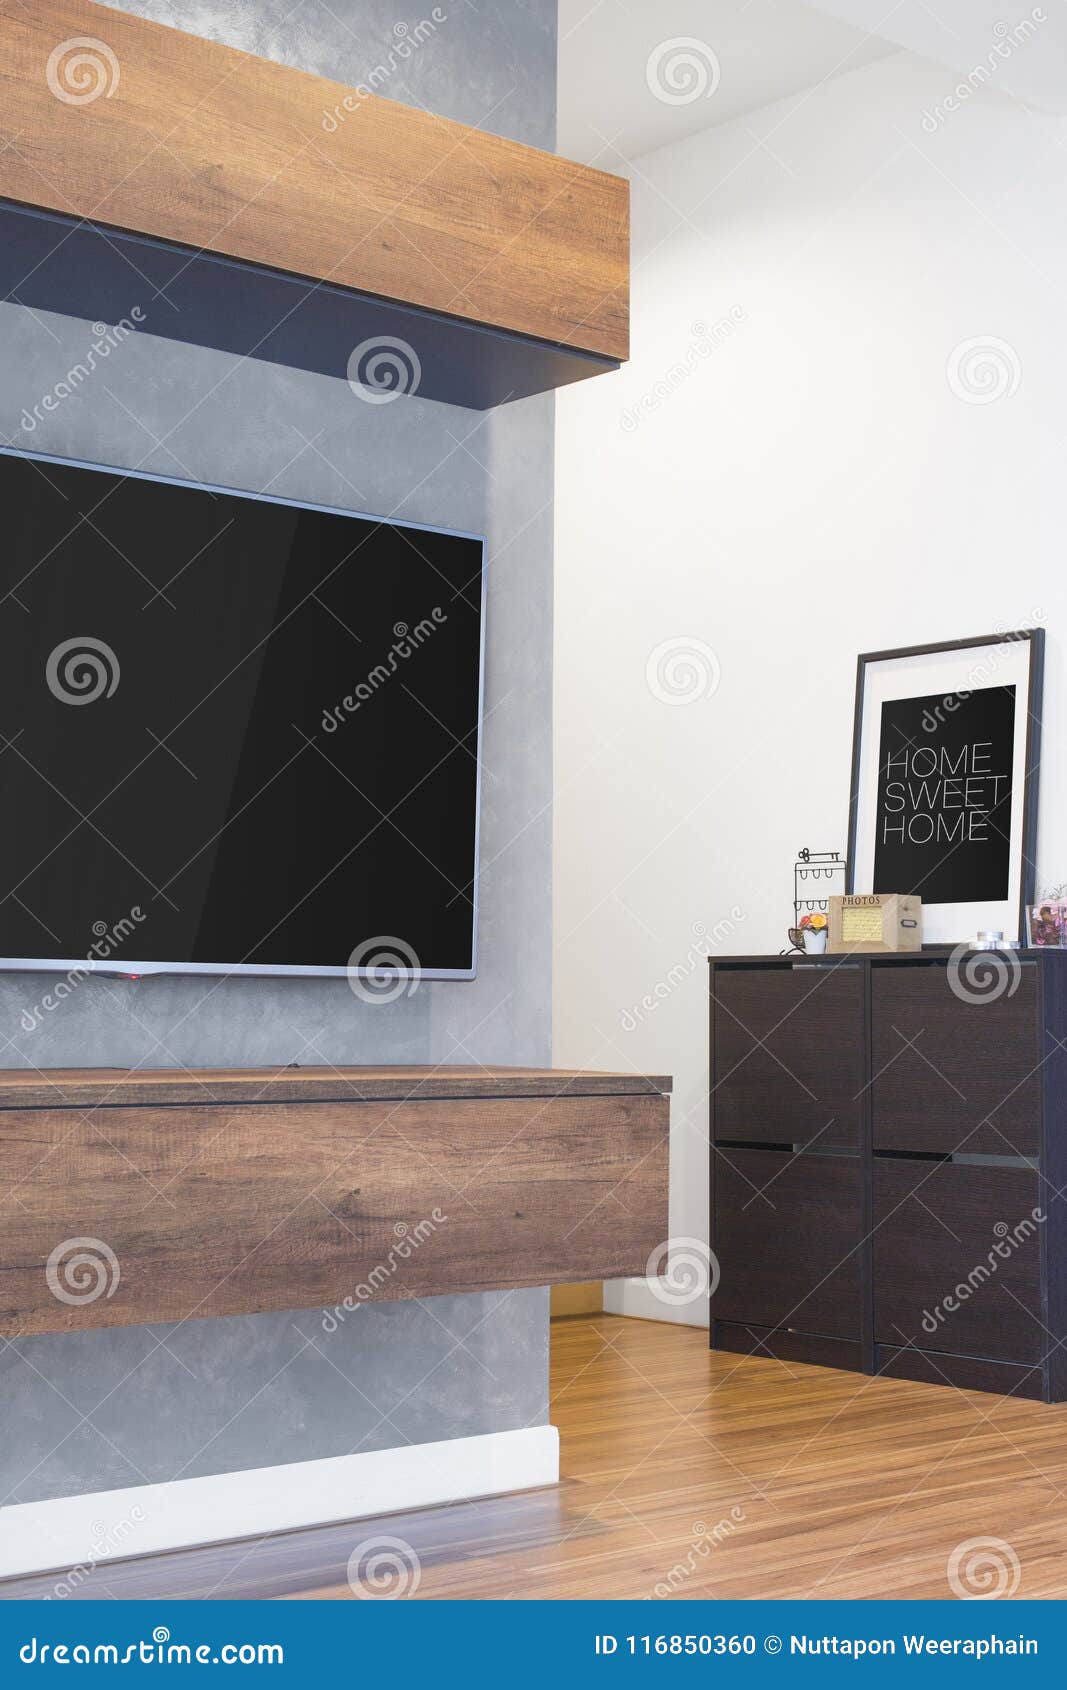 Led Tv Hang On The Cement Wall With Wood Cabinet Furniture And H